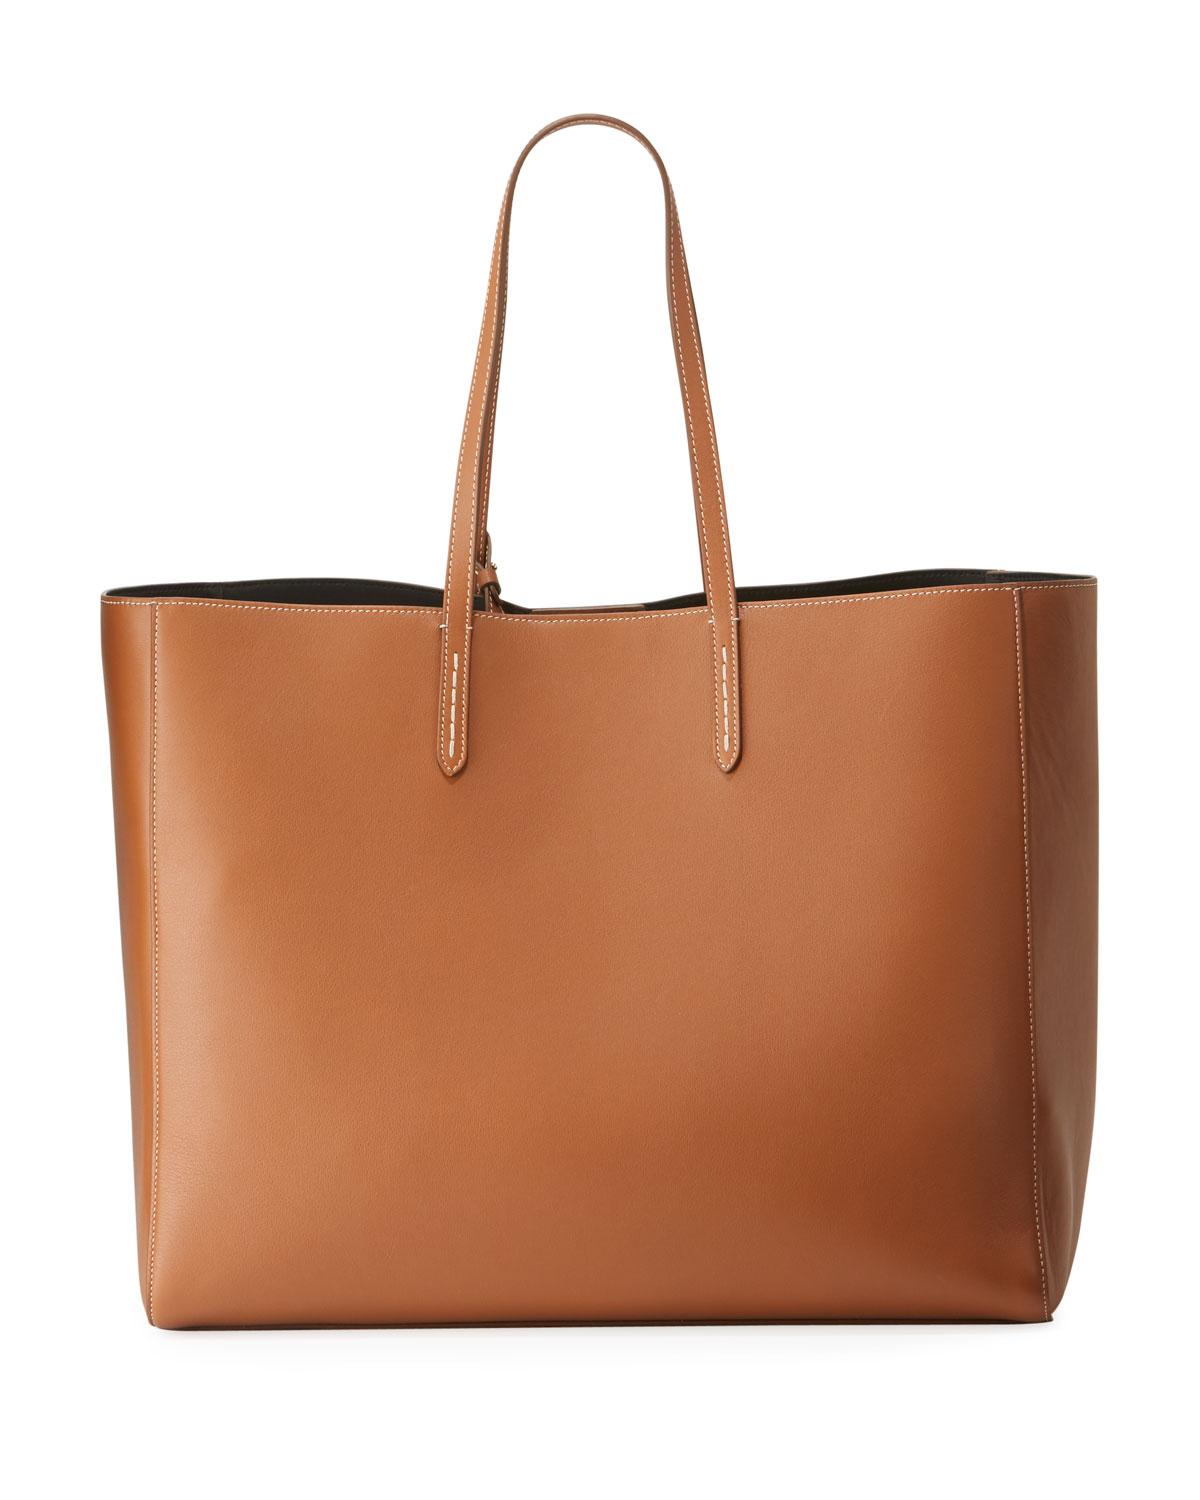 Ralph Lauren Smooth Leather Tote Bag in Brown - Lyst